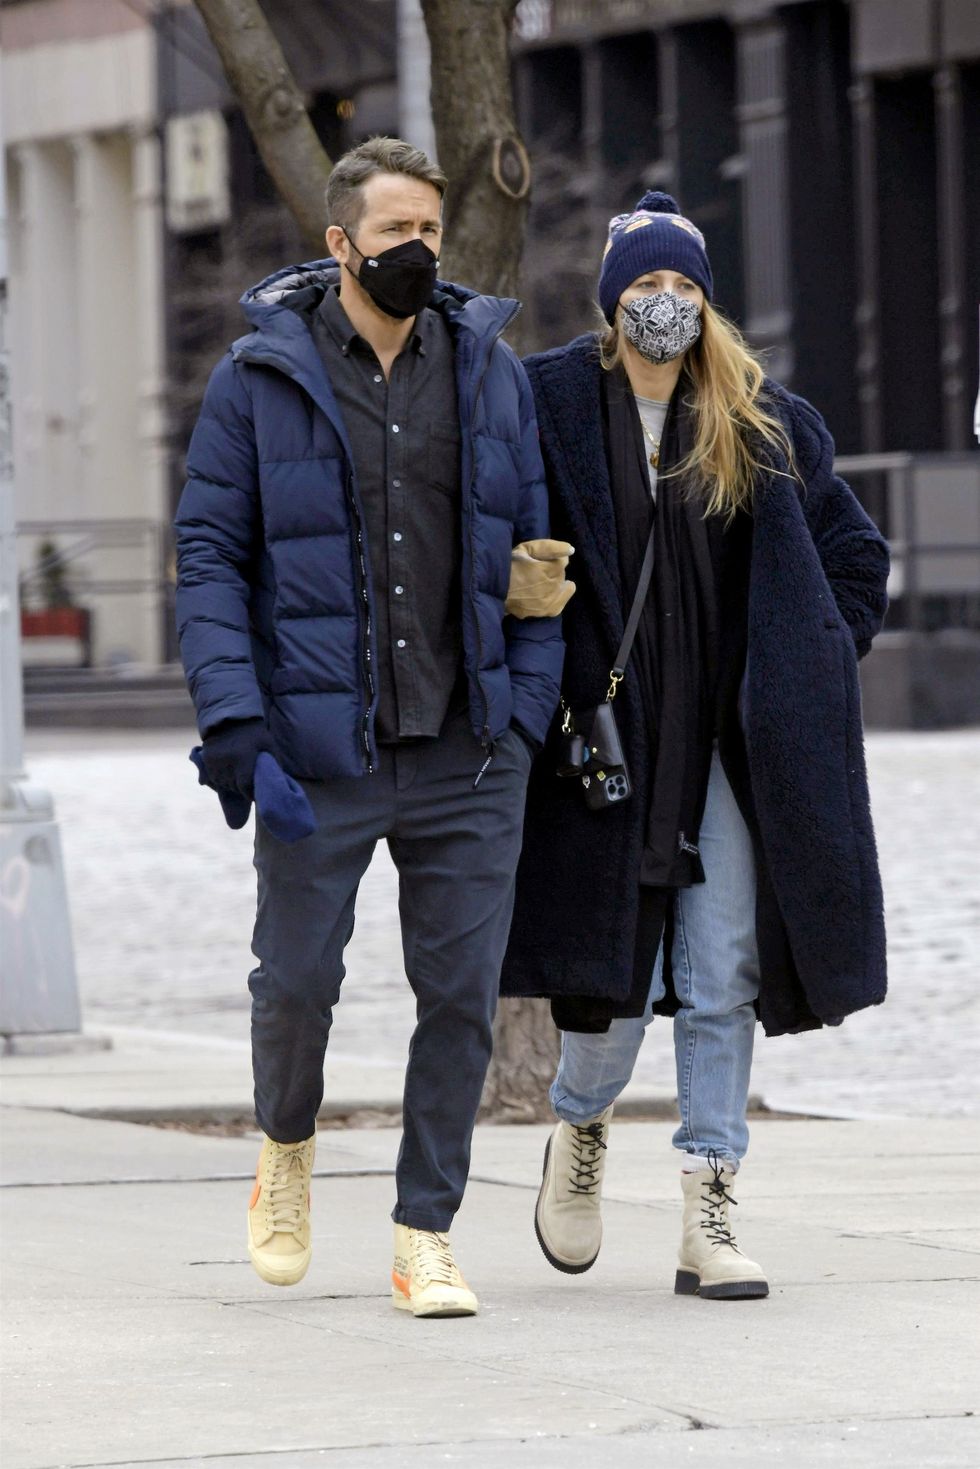 new york, ny    blake lively wears a teddy bear fur coat, faded jeans and boots while holding on to ryan reynolds on a romantic walk in tribeca new york citypictured blake lively, ryan reynoldsbackgrid usa 24 january 2022 byline must read backgridusa 1 310 798 9111  usasalesbackgridcomuk 44 208 344 2007  uksalesbackgridcomuk clients   pictures containing childrenplease pixelate face prior to publication